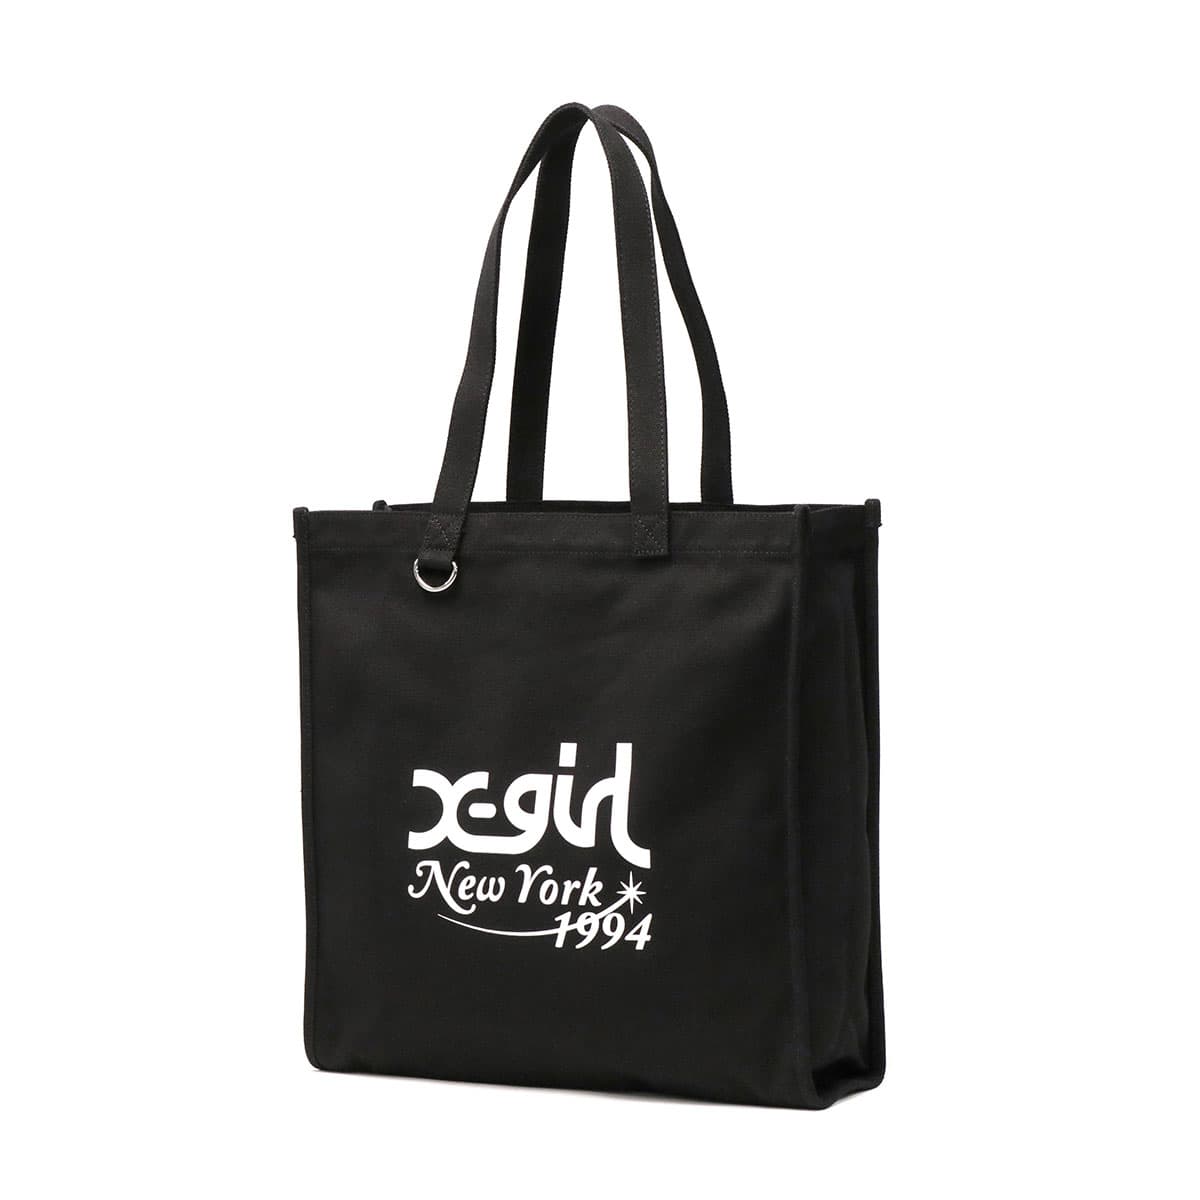 X-girl エックスガール NEW YORK CANVAS TOTE BAG トートバッグ 105234053003